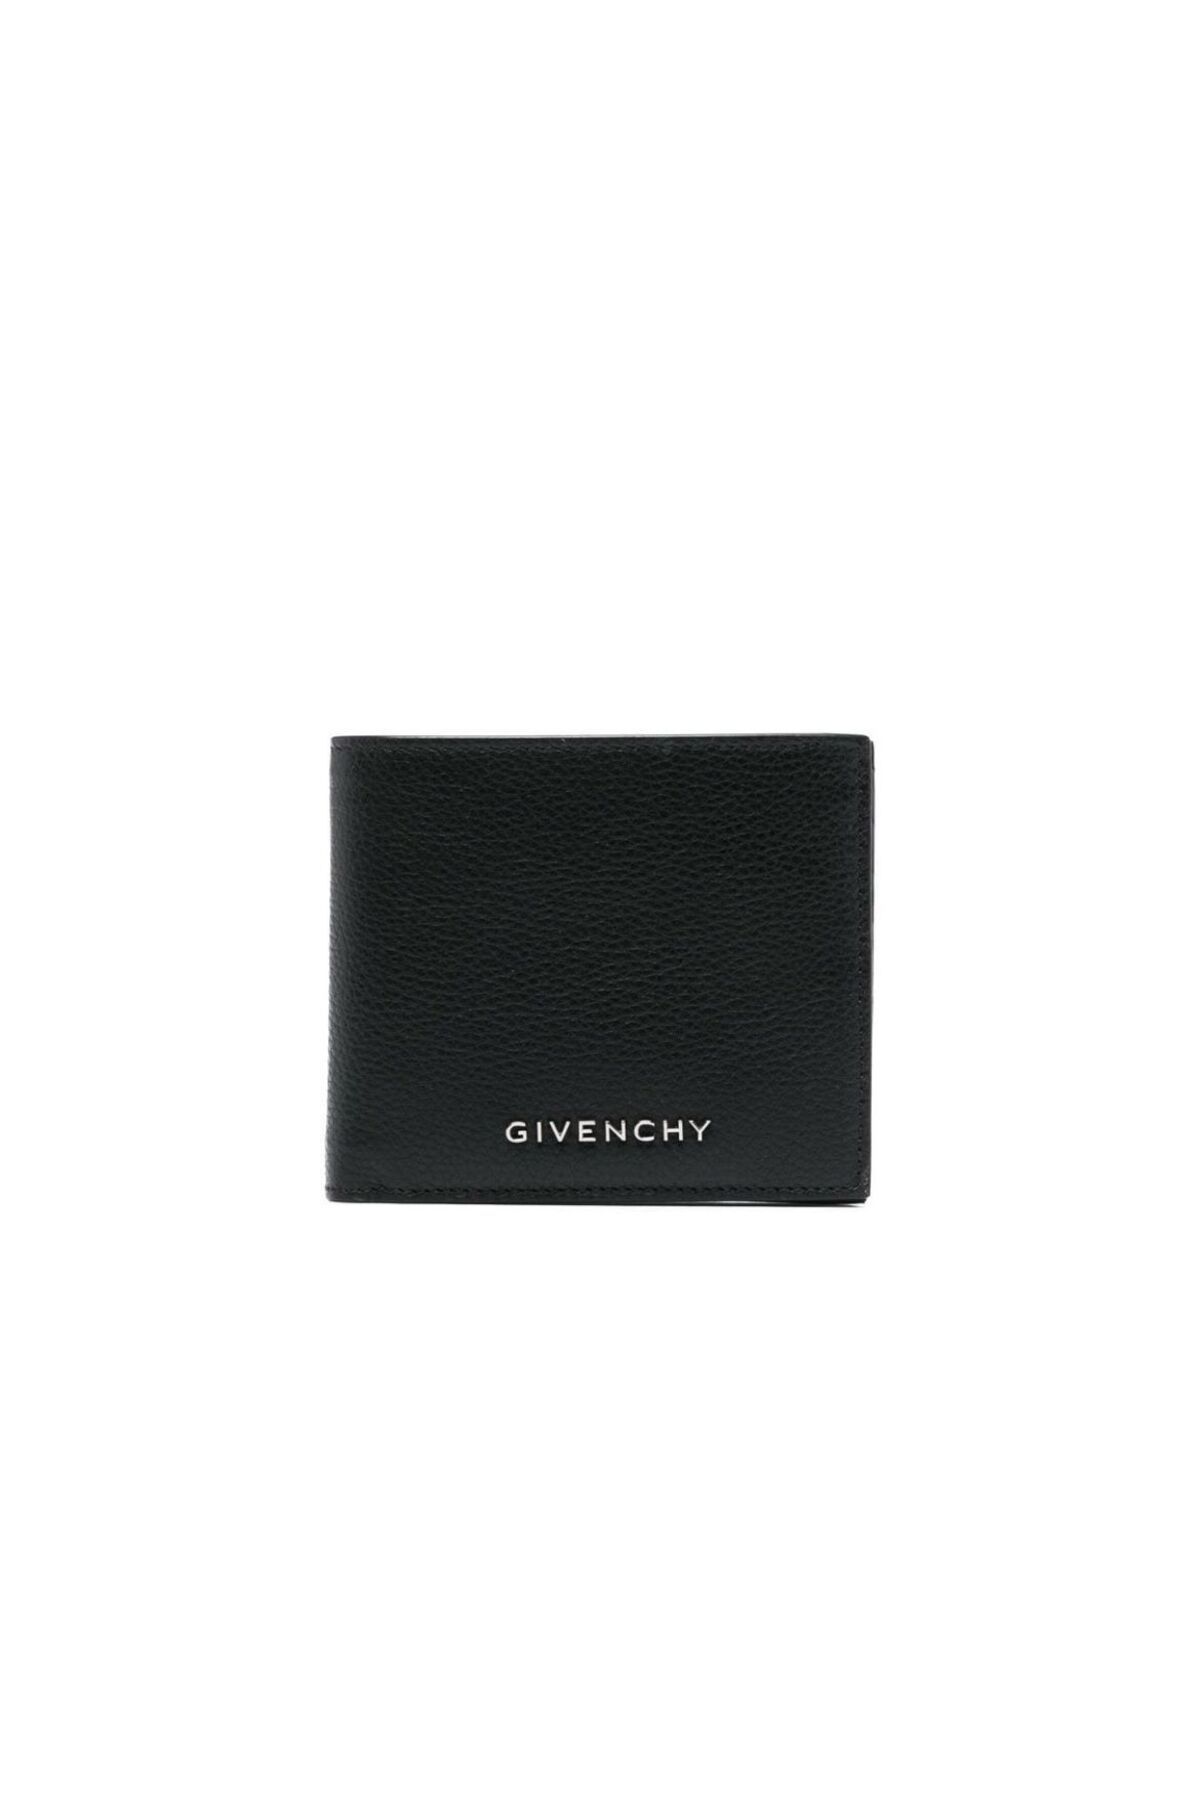 Givenchy Grained-Leather Bi-Fold Wallet